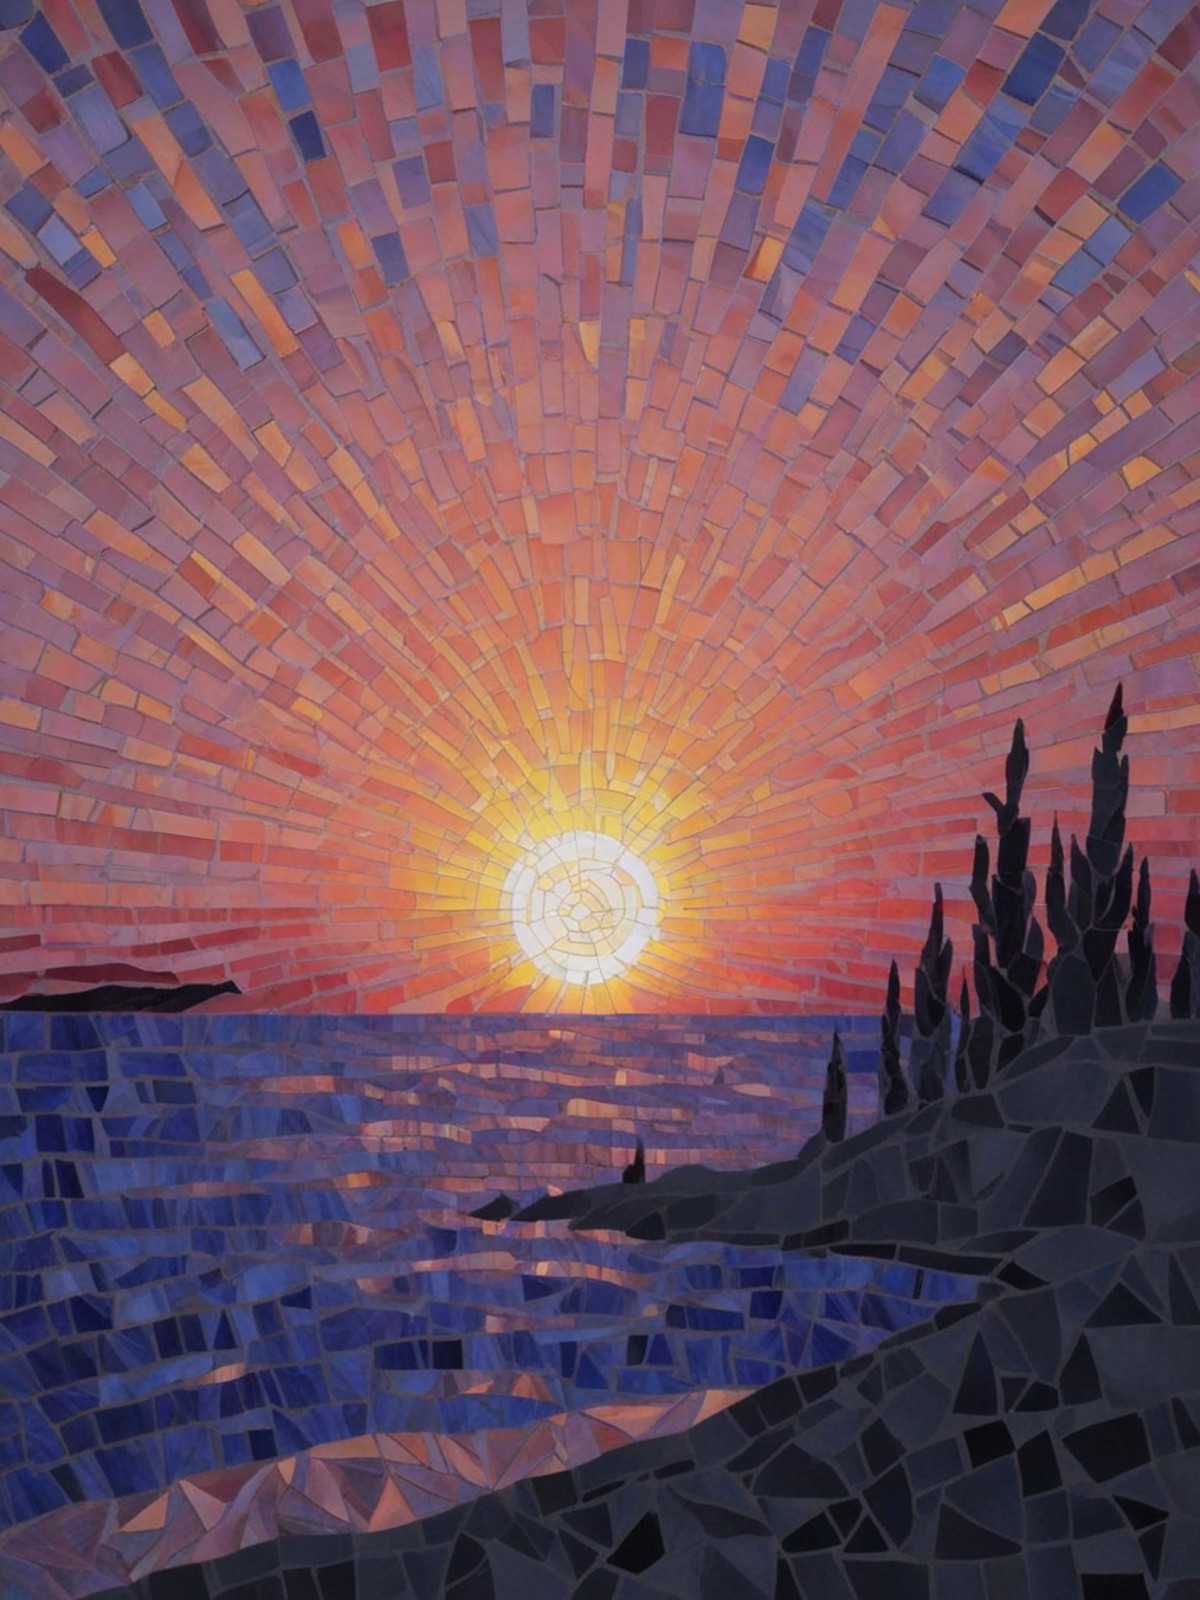 A sunset over an ocean rendered in a mosaic pattern of various shades of blue, purple, and orange tiles. The sun is central and prominent, with its light reflecting off the water’s surface. The sky transitions from warm orange near the sun to cooler purples and blues as it stretches upward. Silhouetted against the vibrant sky are what appear to be tall, slender trees on an incline leading down to the water. 